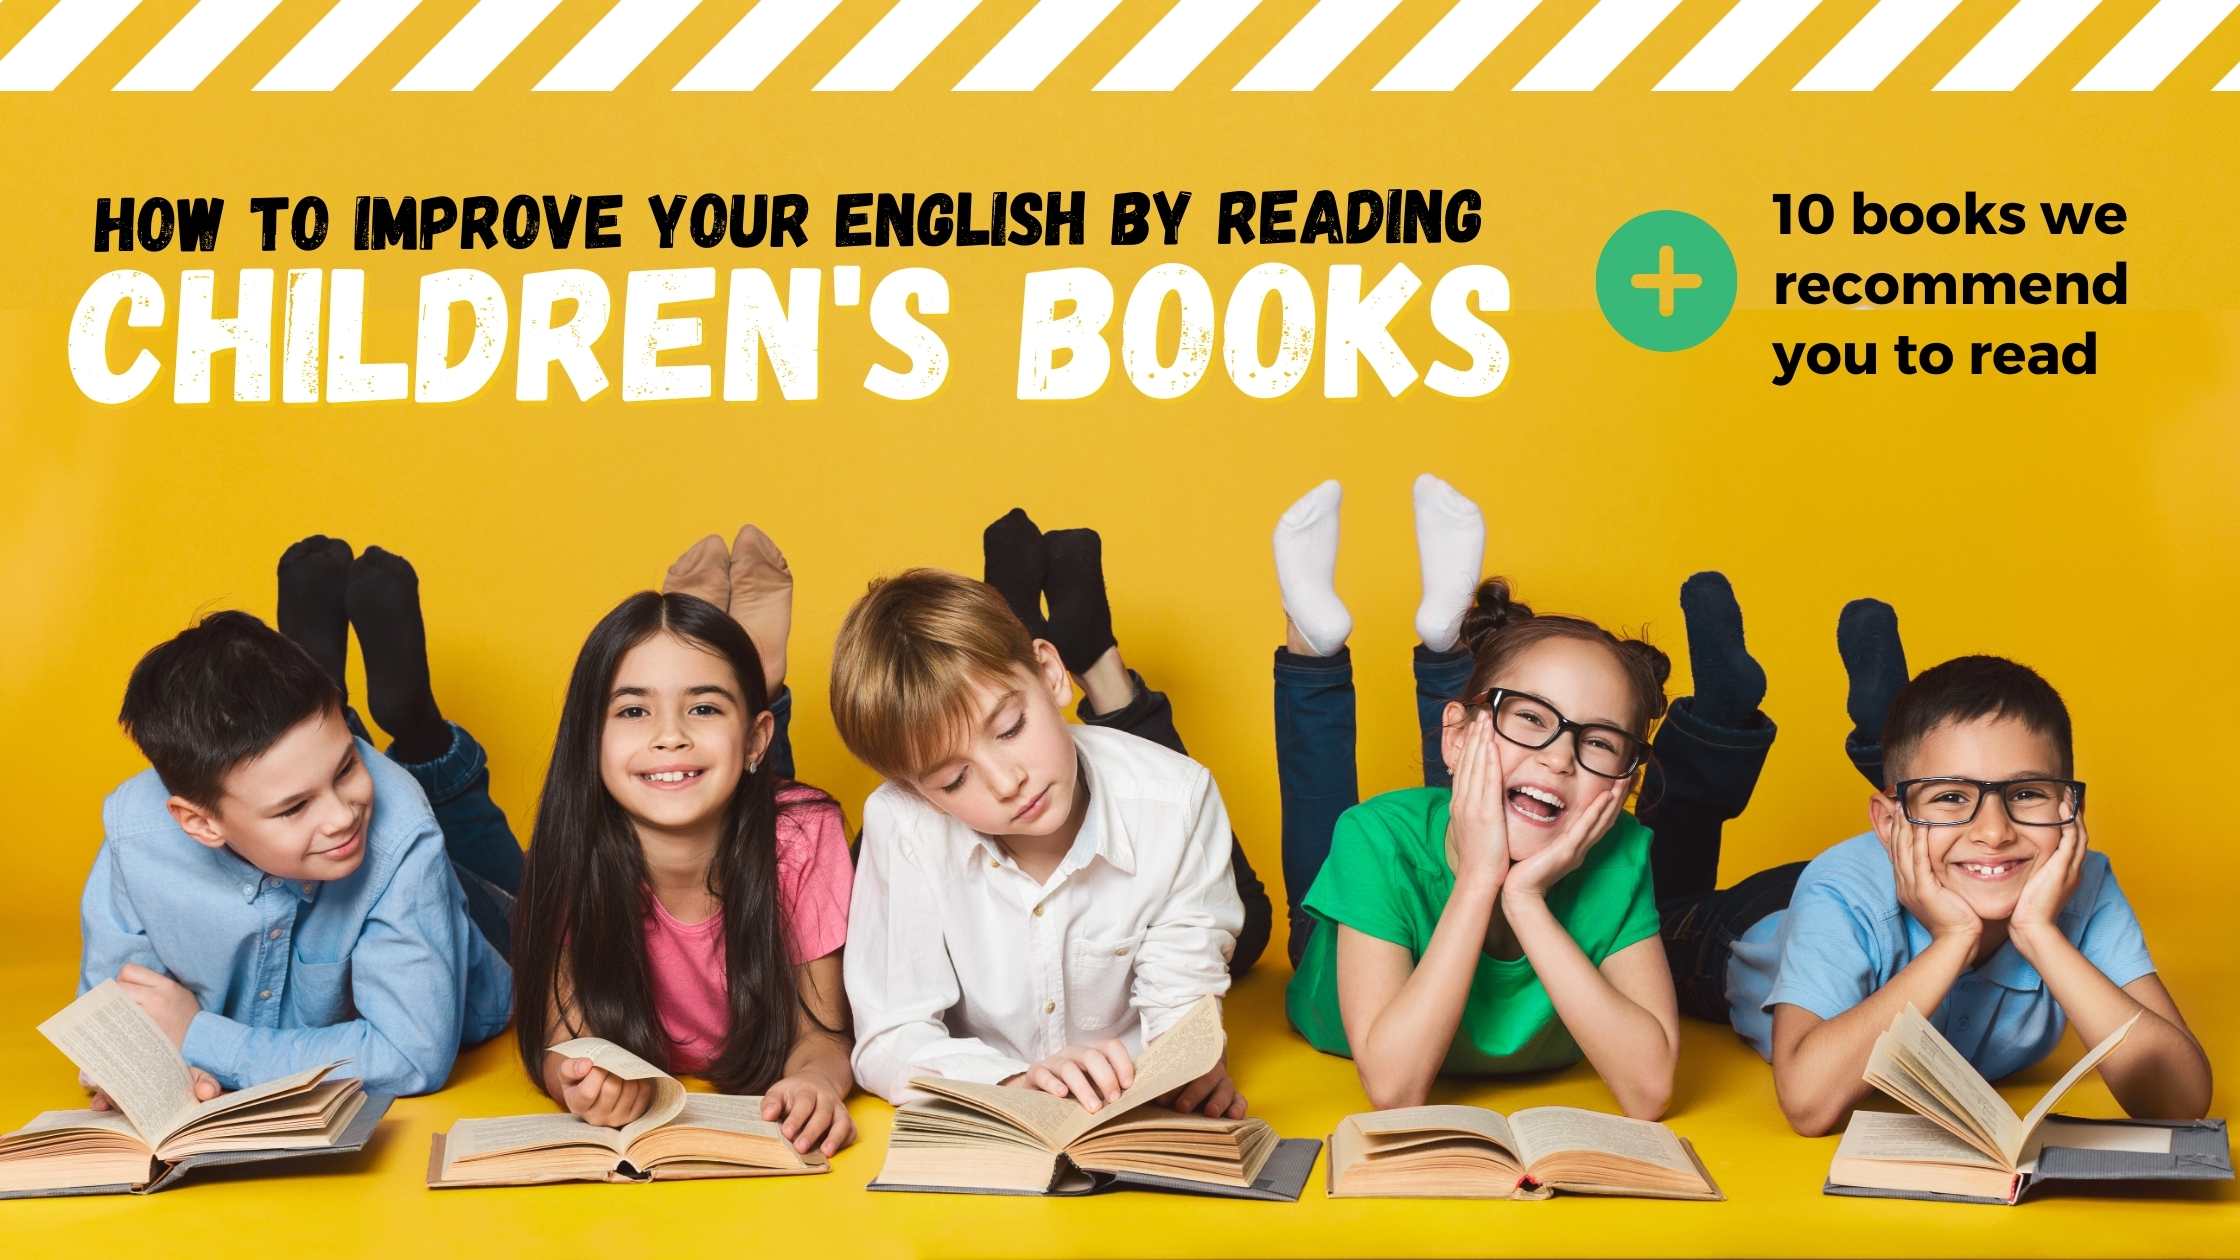 childrens books in english, read childrens books in english, how to improve reading in english